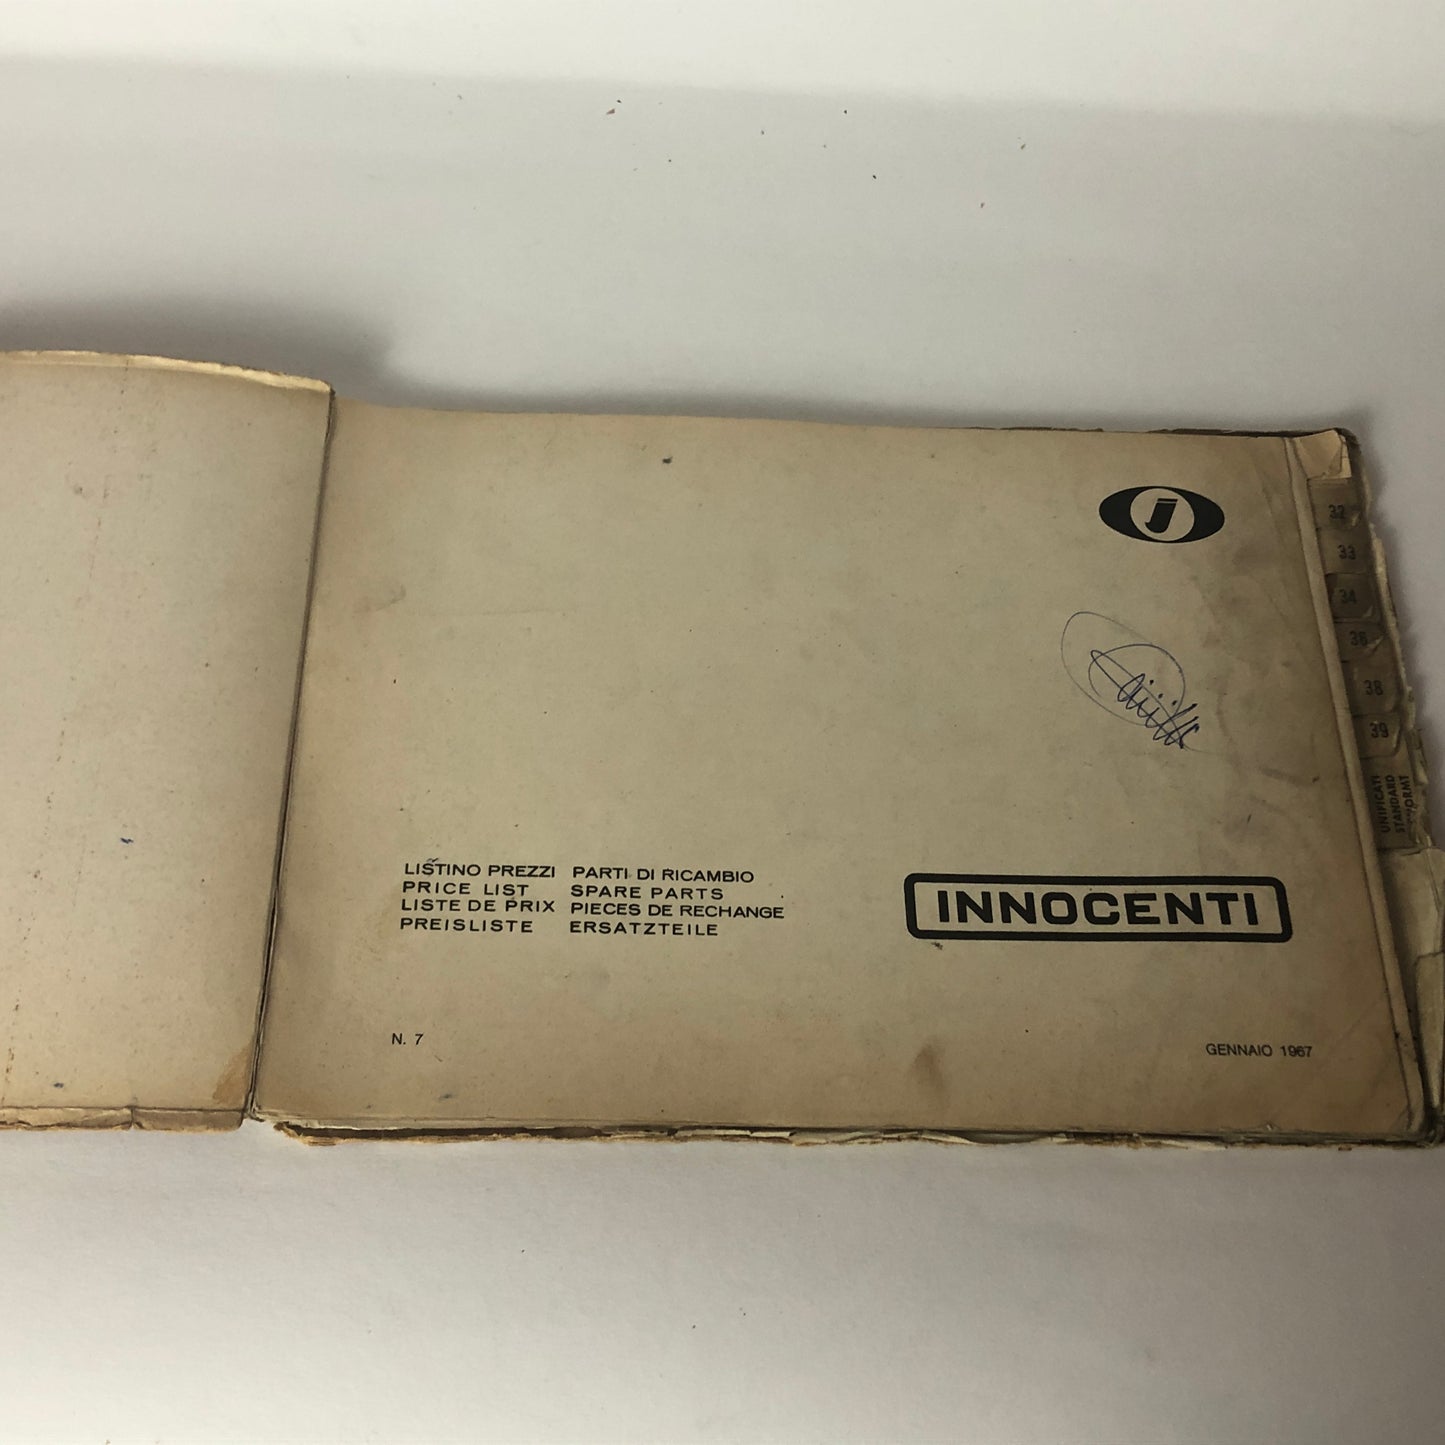 Innocenti, Price List of Spare Parts n.7 Year 1967